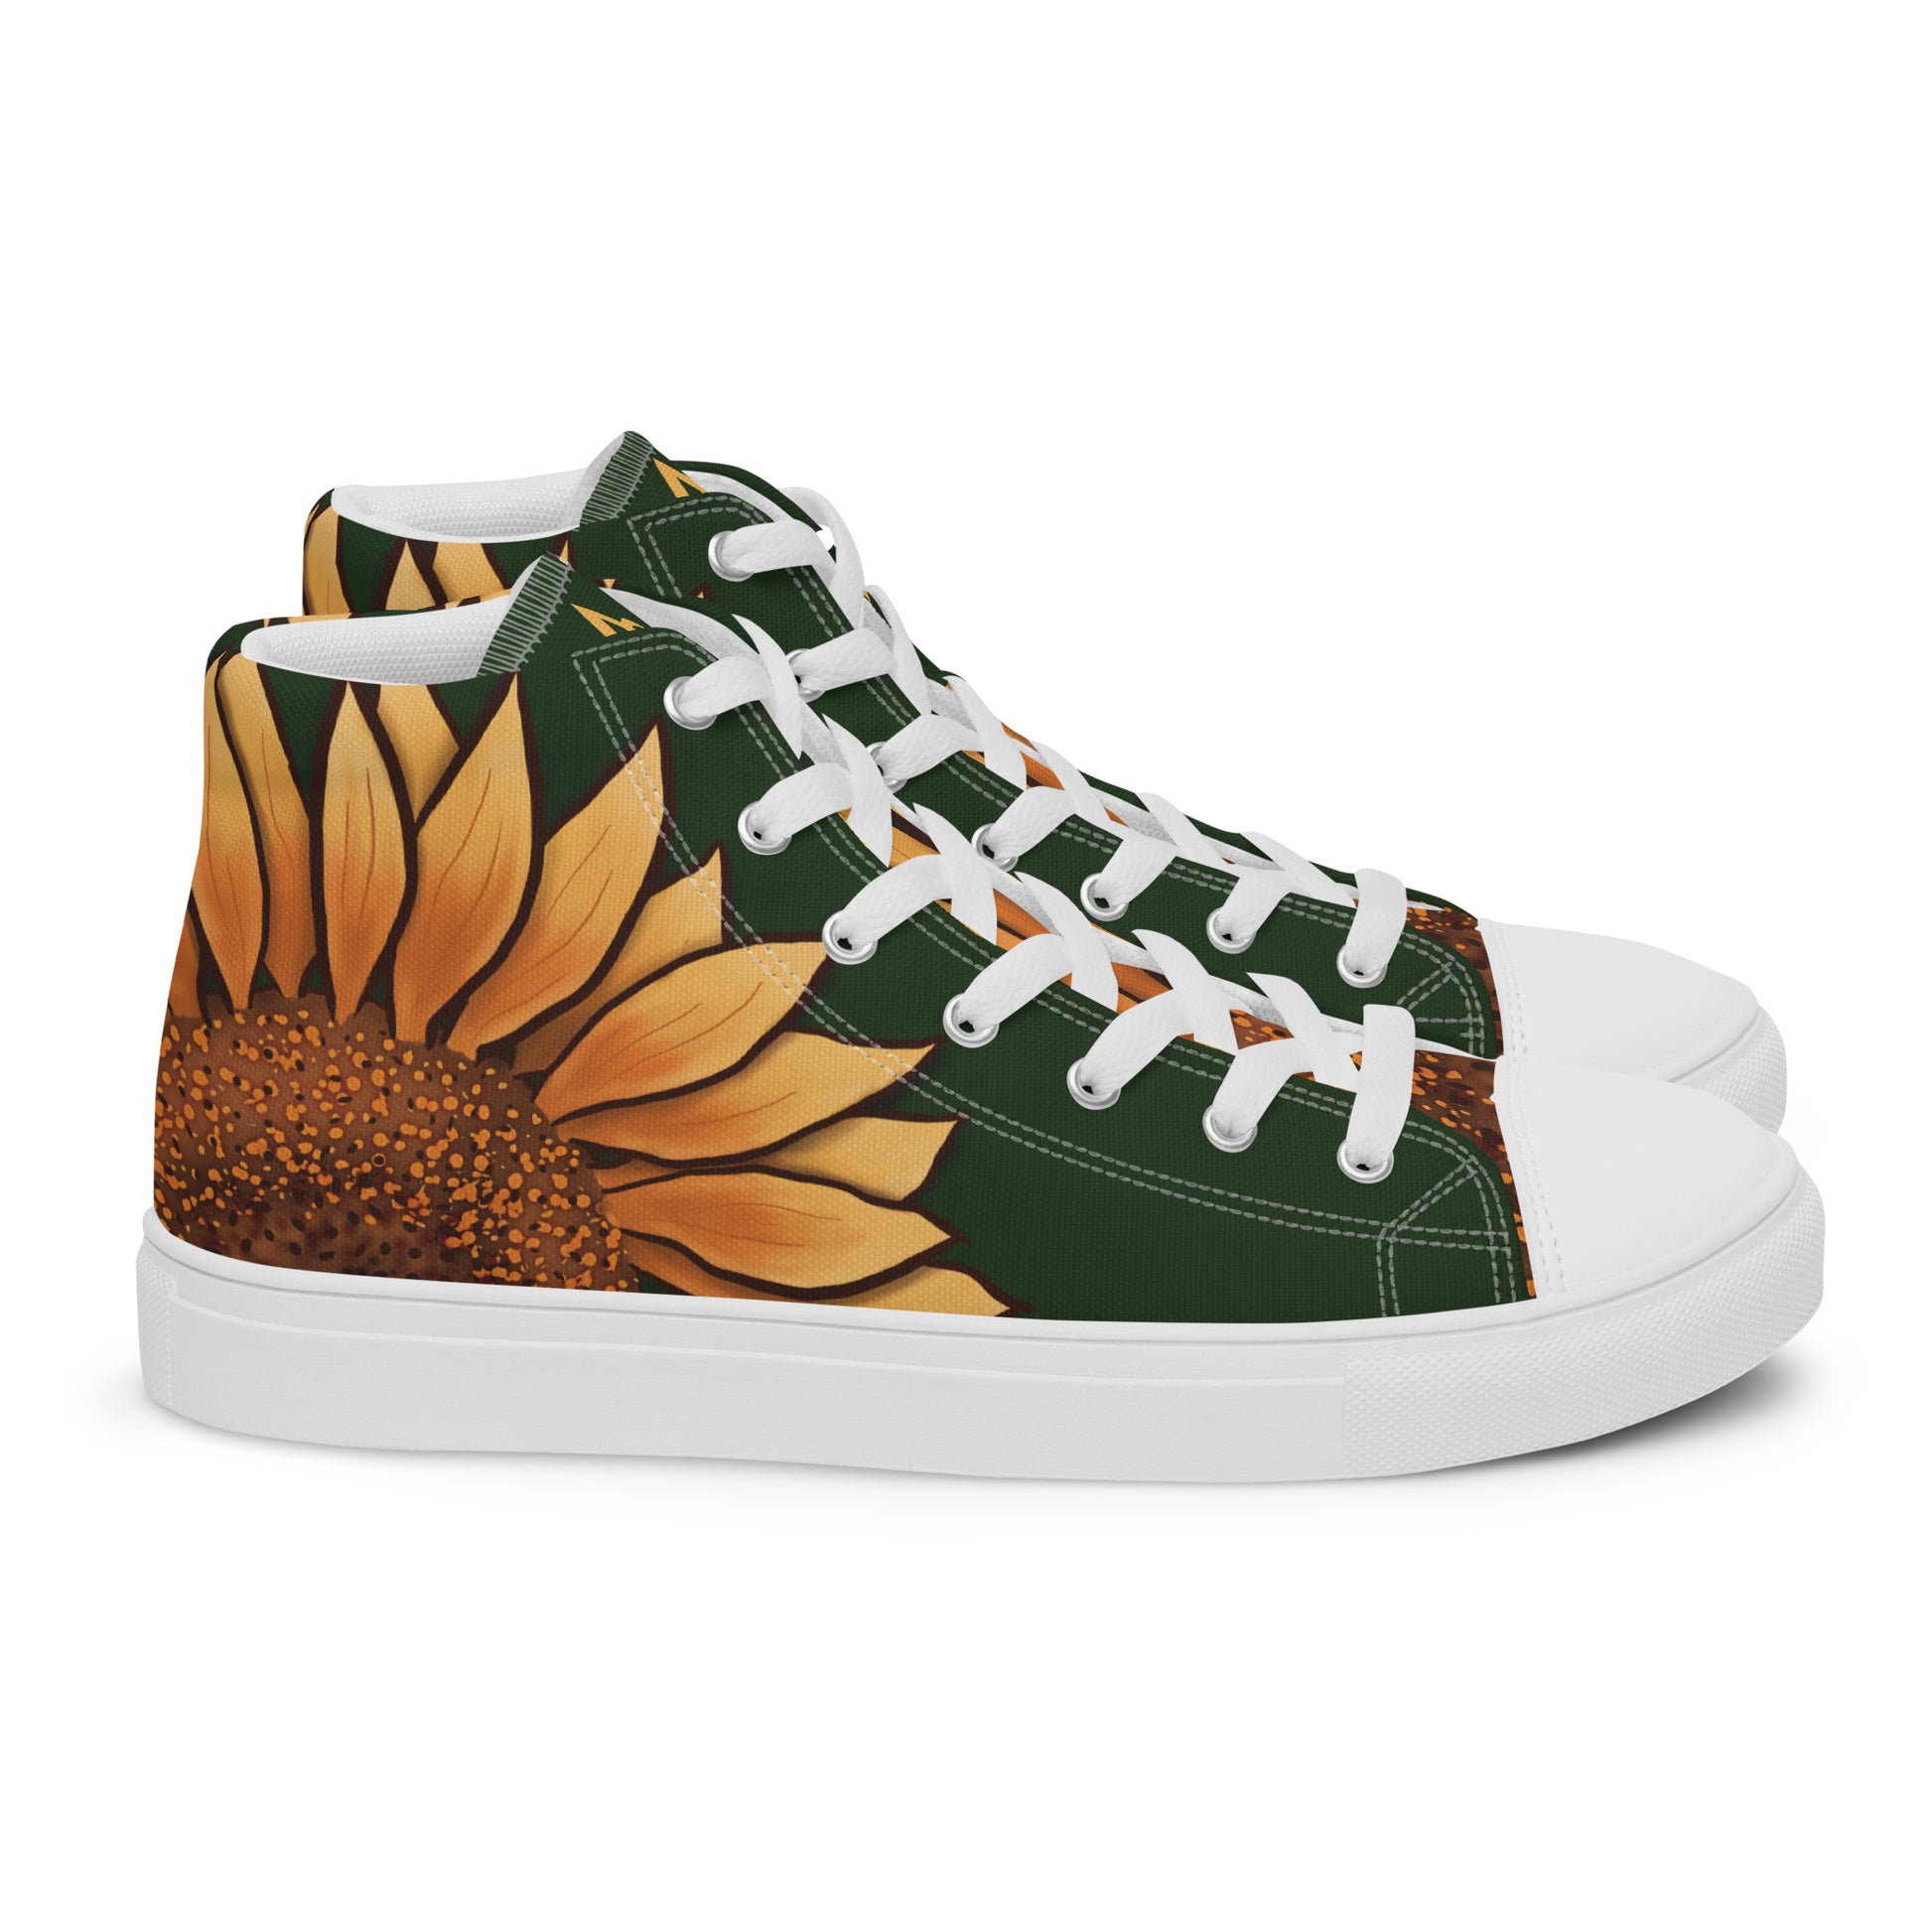 Right view: a dark green high top shoe with a large sunflower painting on the side, the middle starting around the heel and the petals wrapping around the side of the shoe, almost to the laces.